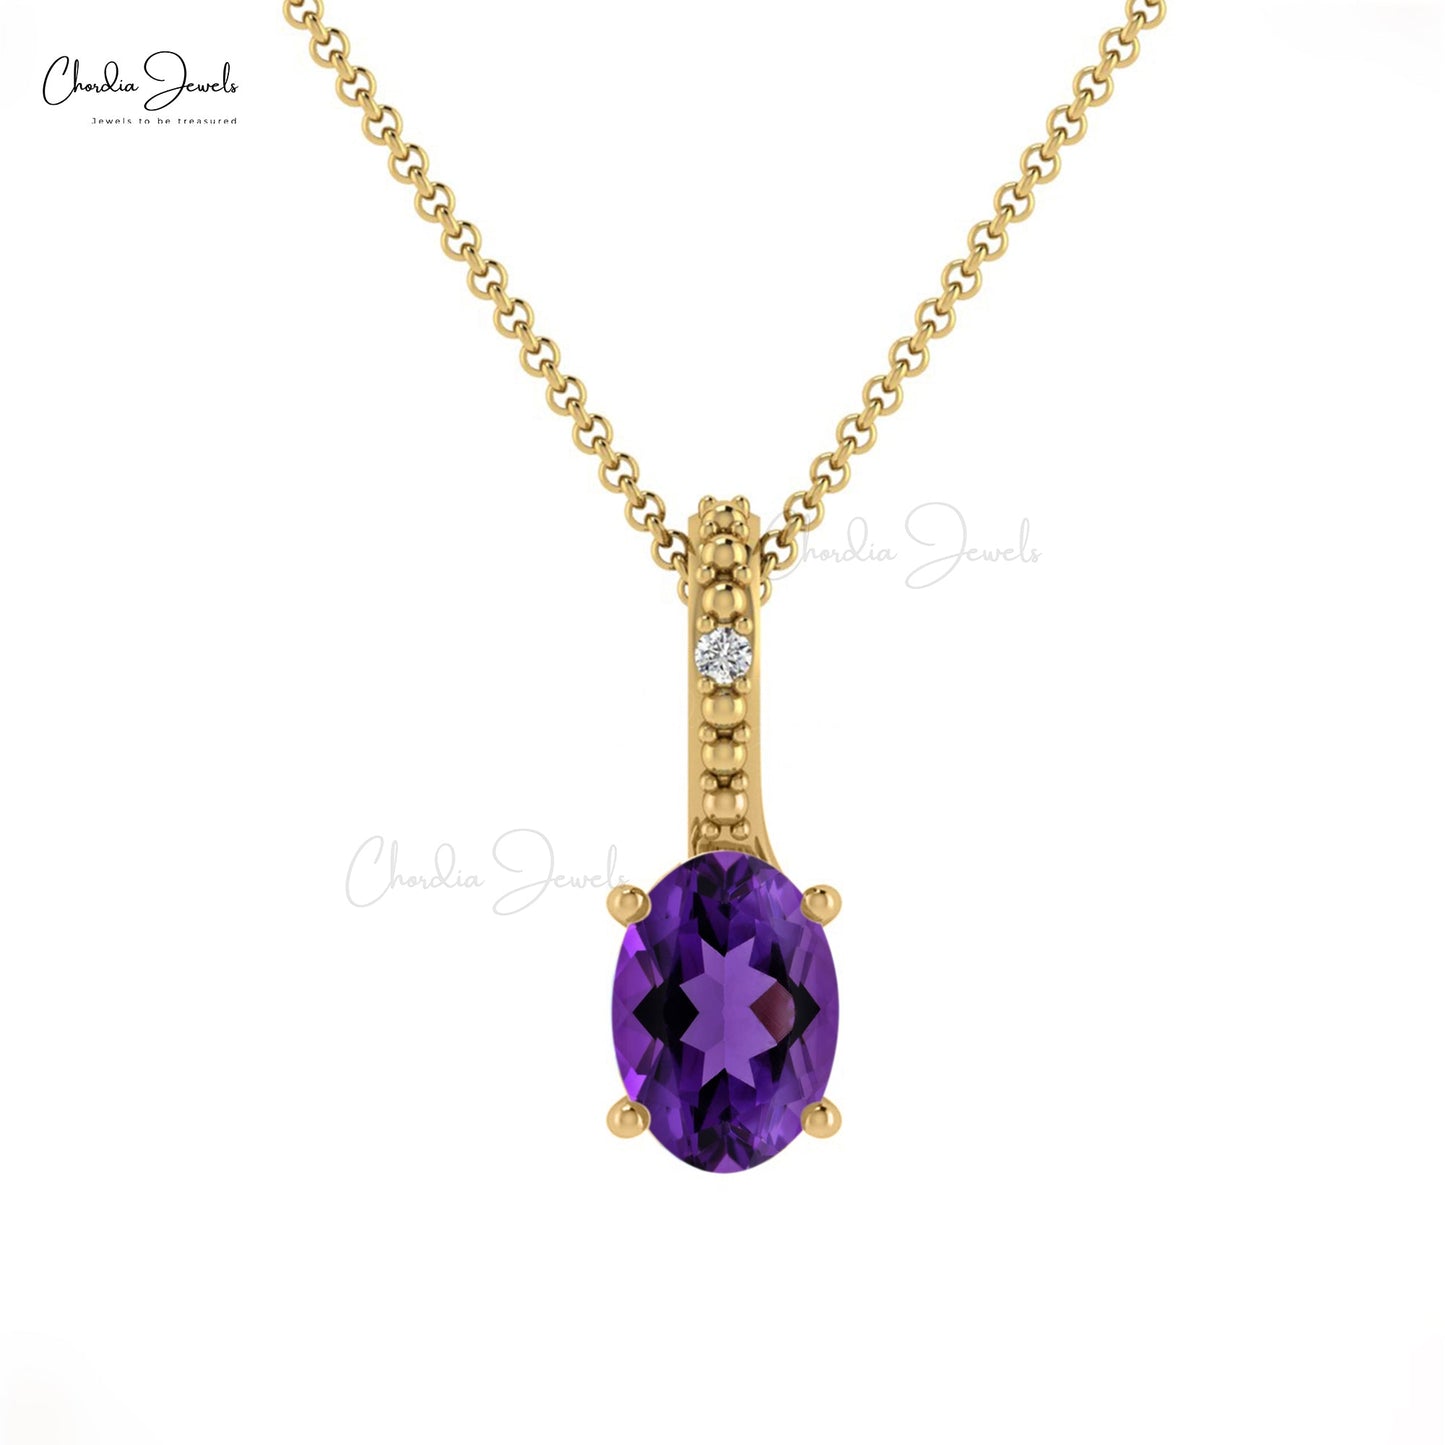 Natural Amethyst & Round Diamond Pendant, 14k Solid Gold Handmade Pendant, 6x4mm Oval faceted Gemstone Pendant Gift for Her